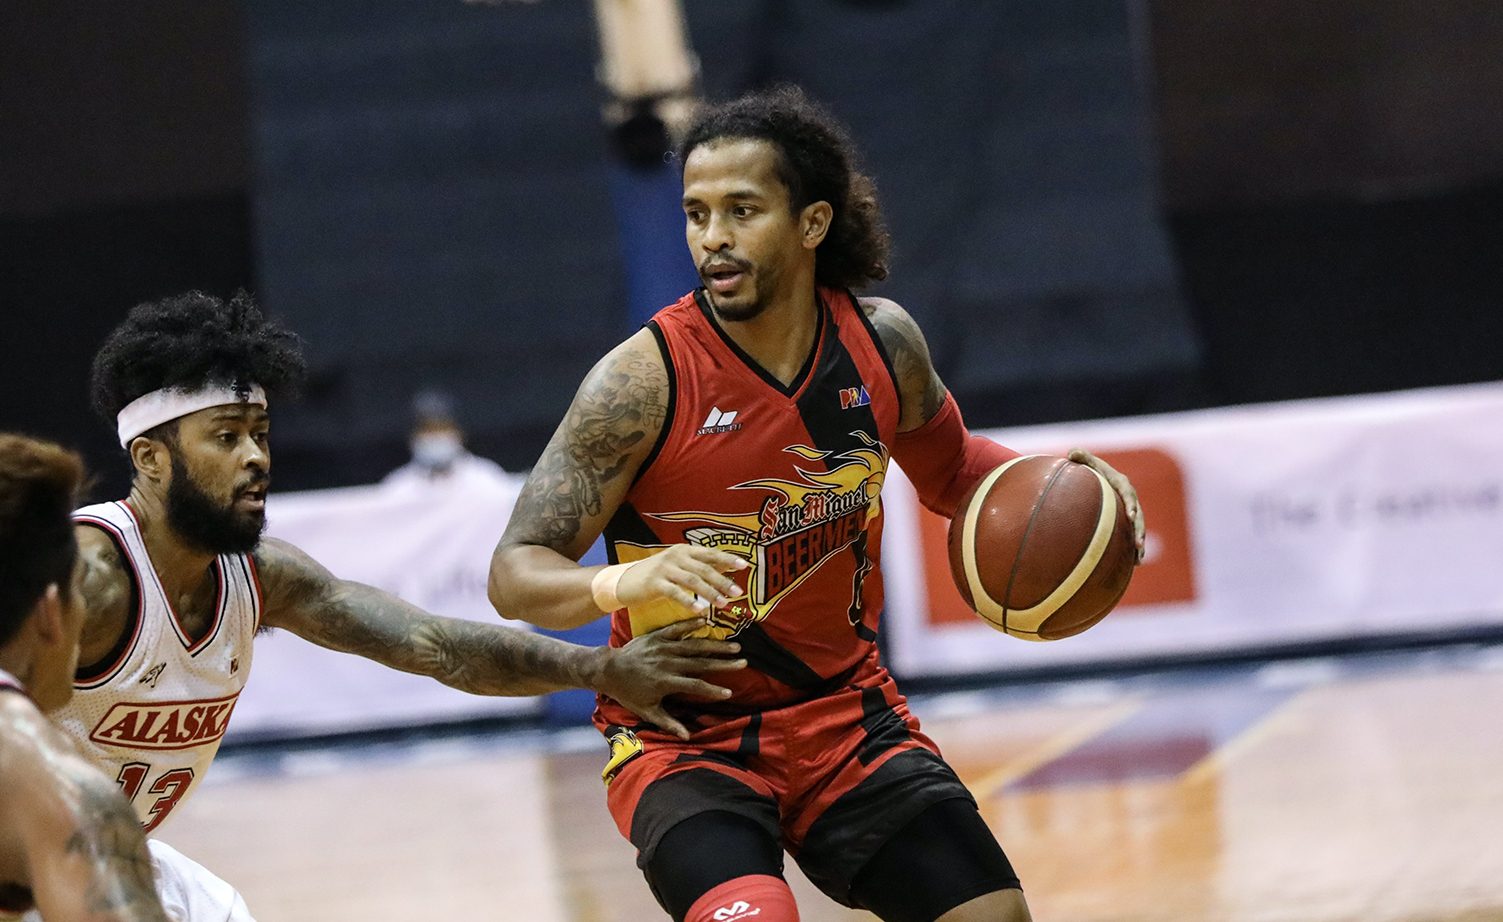 San Miguel star Chris Ross graduates from college at 36